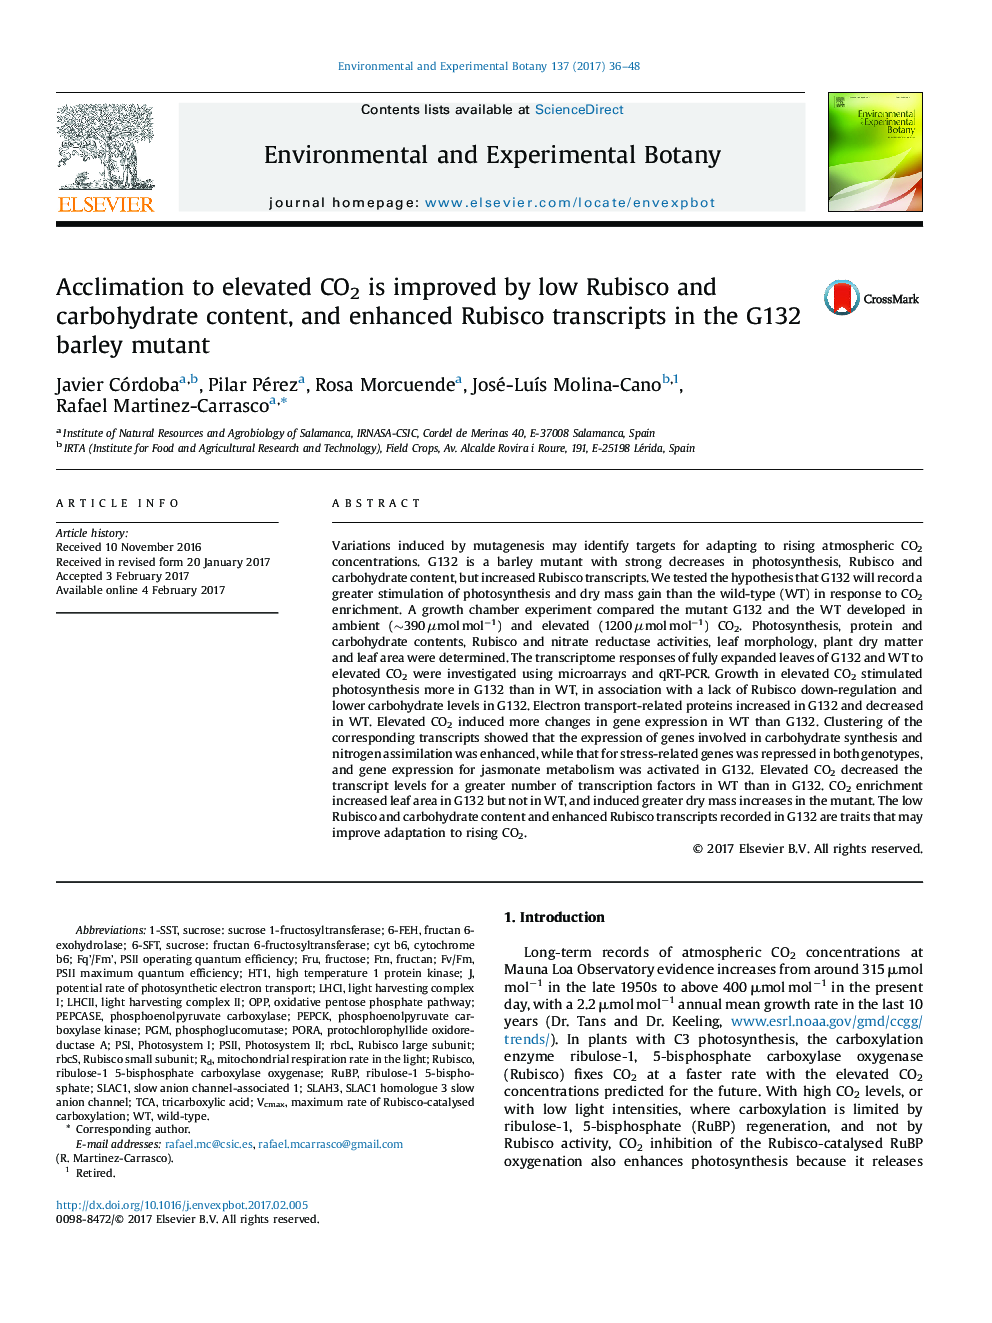 Acclimation to elevated CO2 is improved by low Rubisco and carbohydrate content, and enhanced Rubisco transcripts in the G132 barley mutant